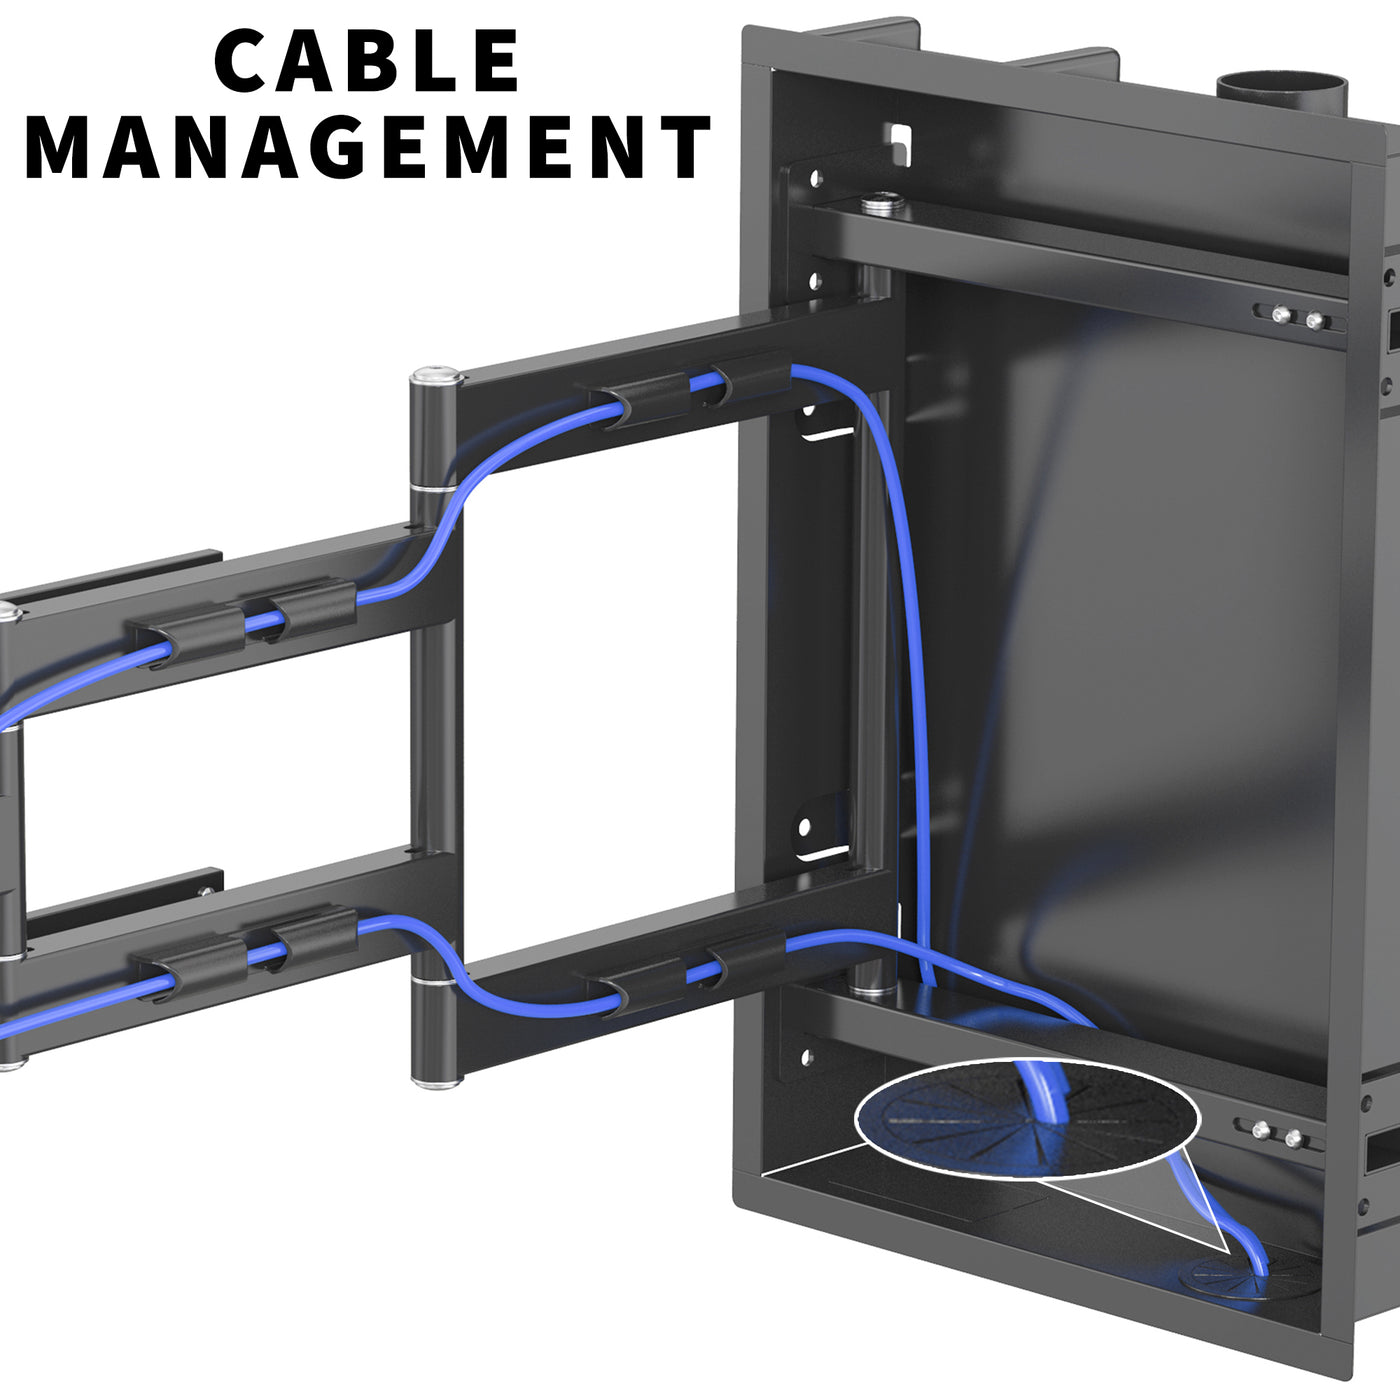 Cable management is incorporated into all three segments of the extending TV wall mount.